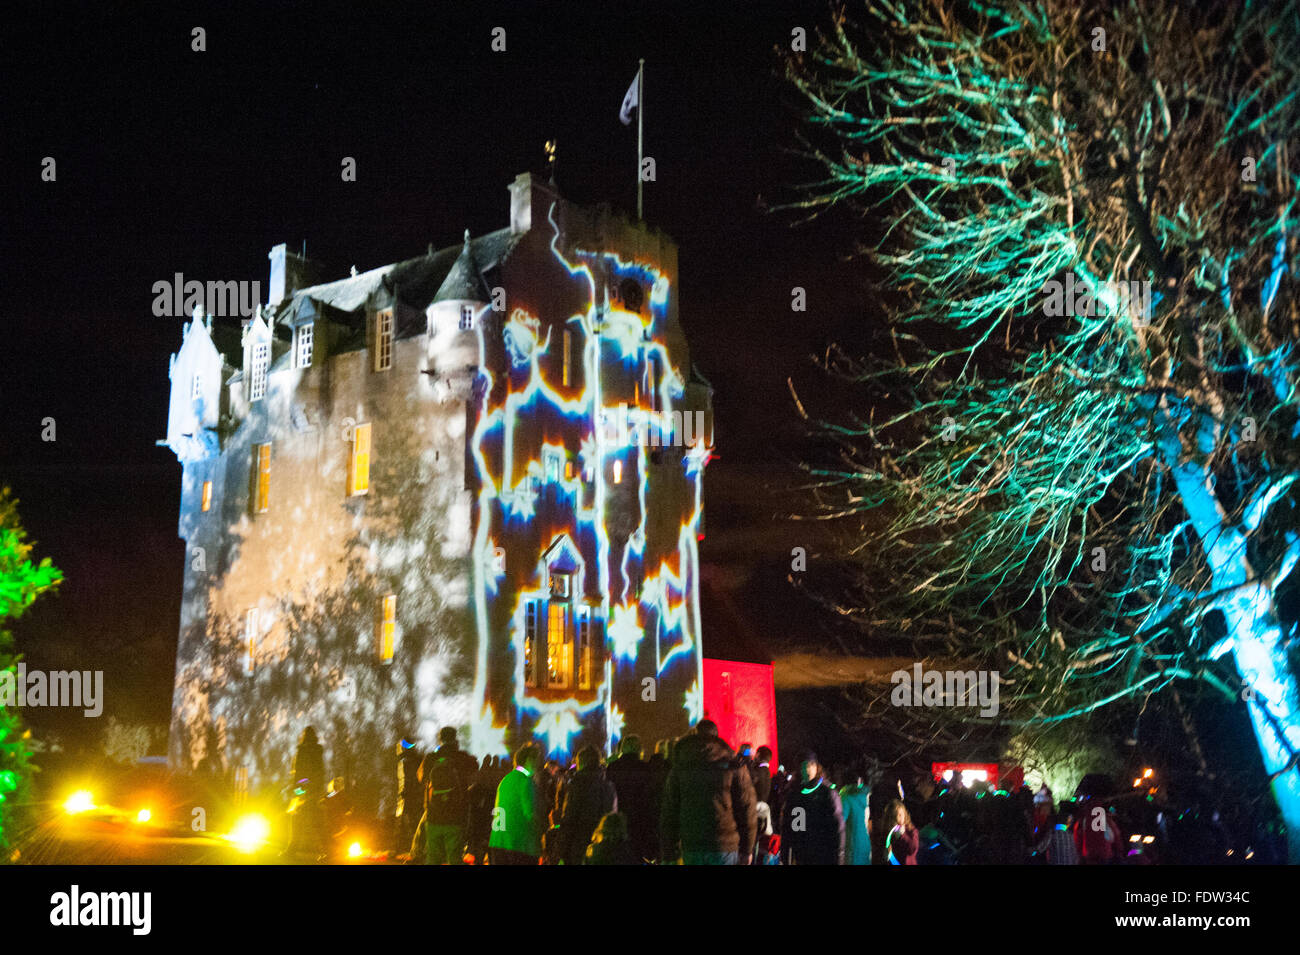 Crathes Castle is lit up with projections at the Enchanted Castle event in Aberdeenshire, Scotland on 26th November 2011. Stock Photo